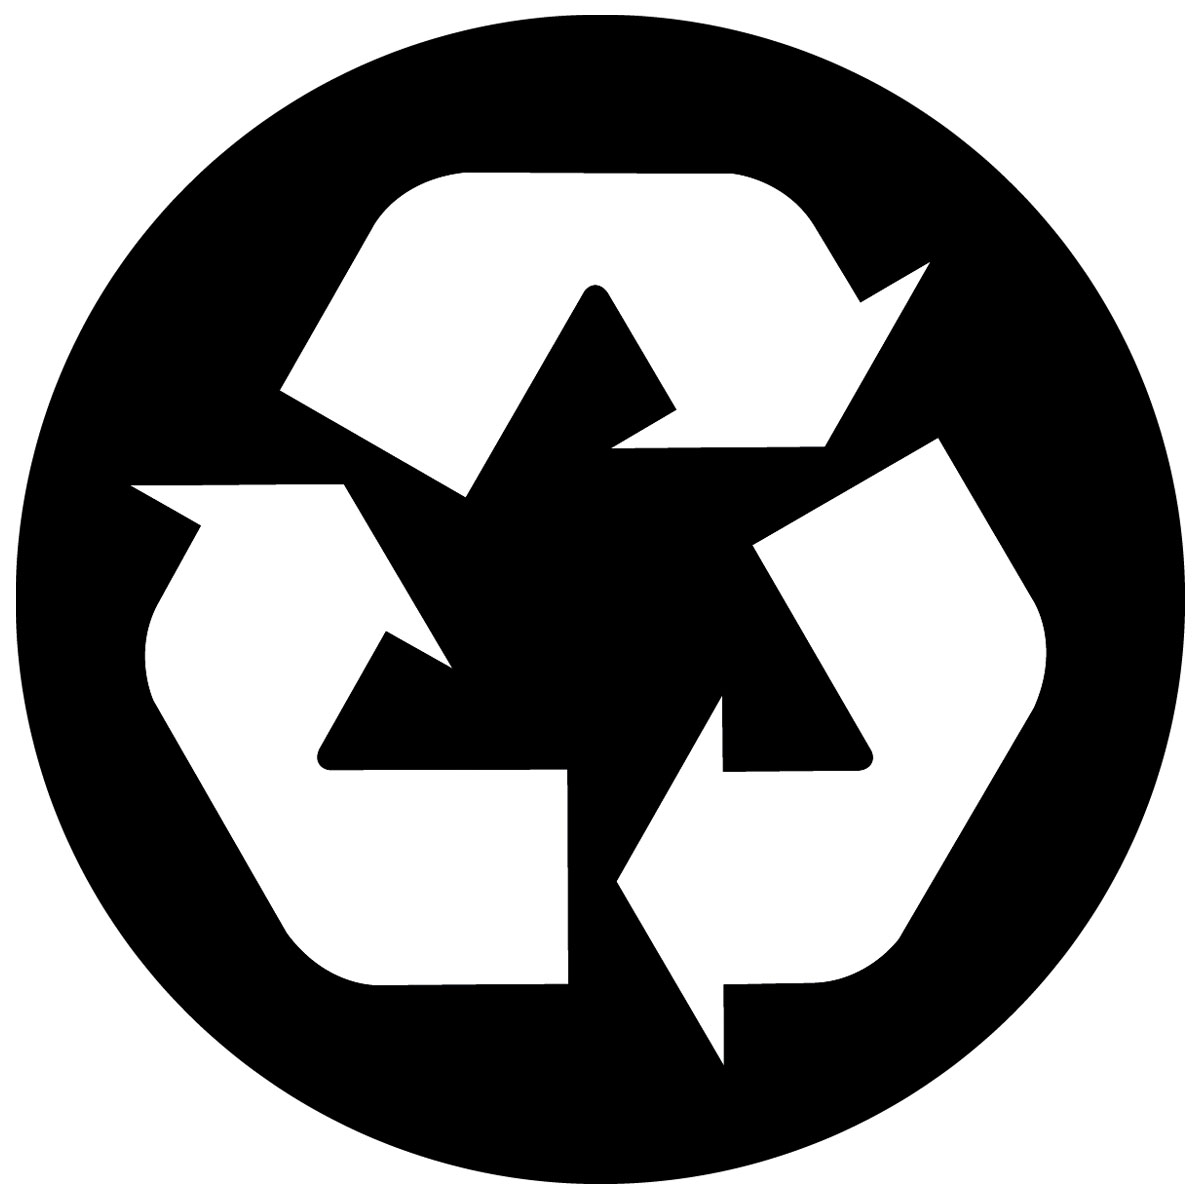 Recycle Symbol Image - ClipArt Best